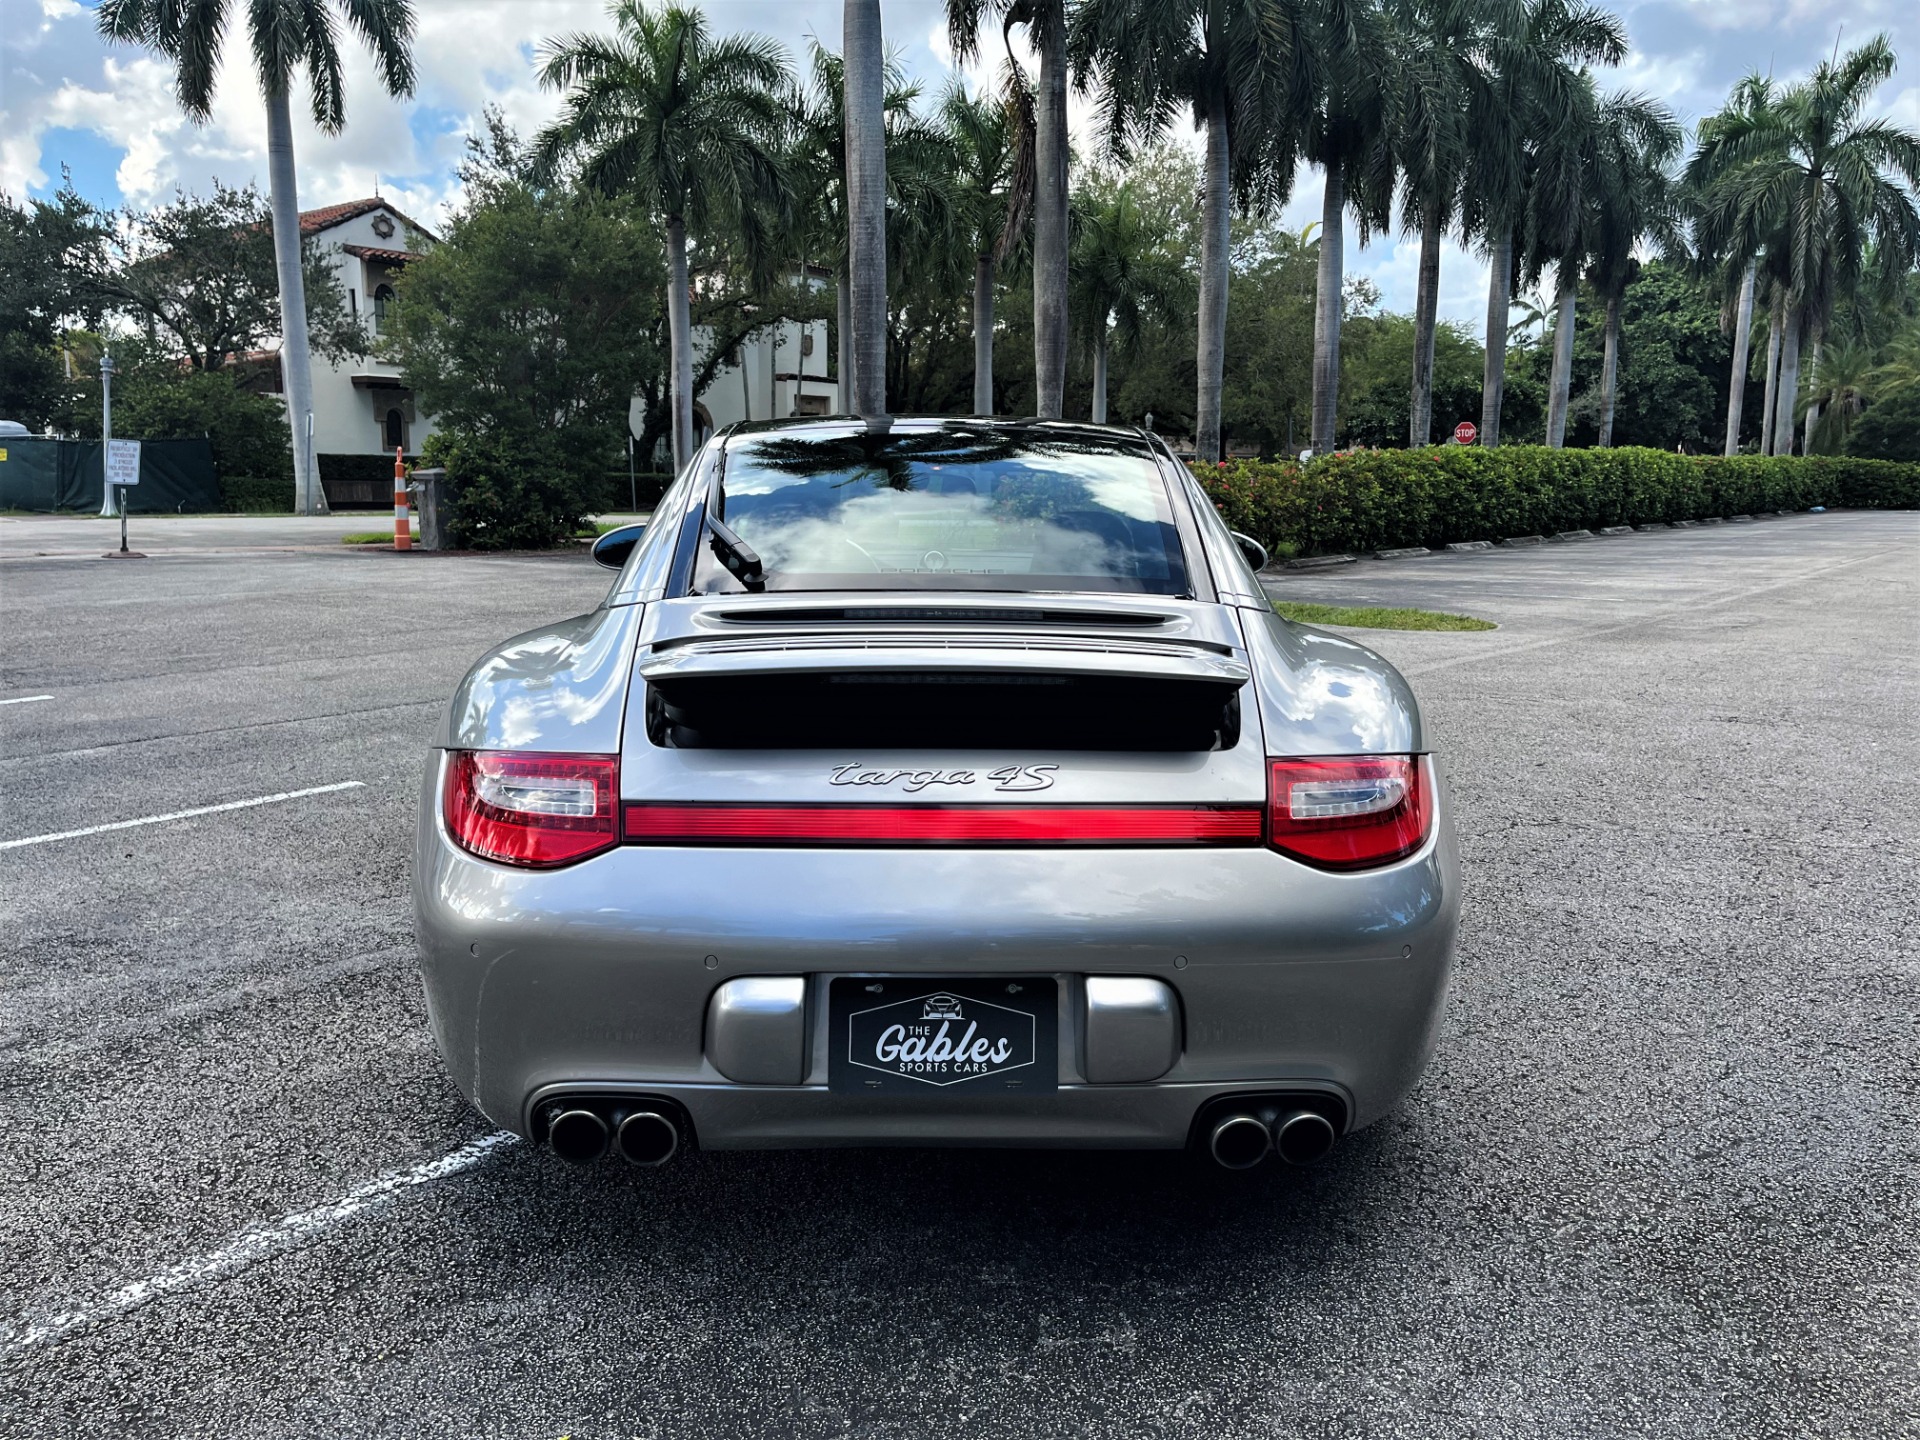 Used 2011 Porsche 911 Targa 4S for sale $88,850 at The Gables Sports Cars in Miami FL 33146 2